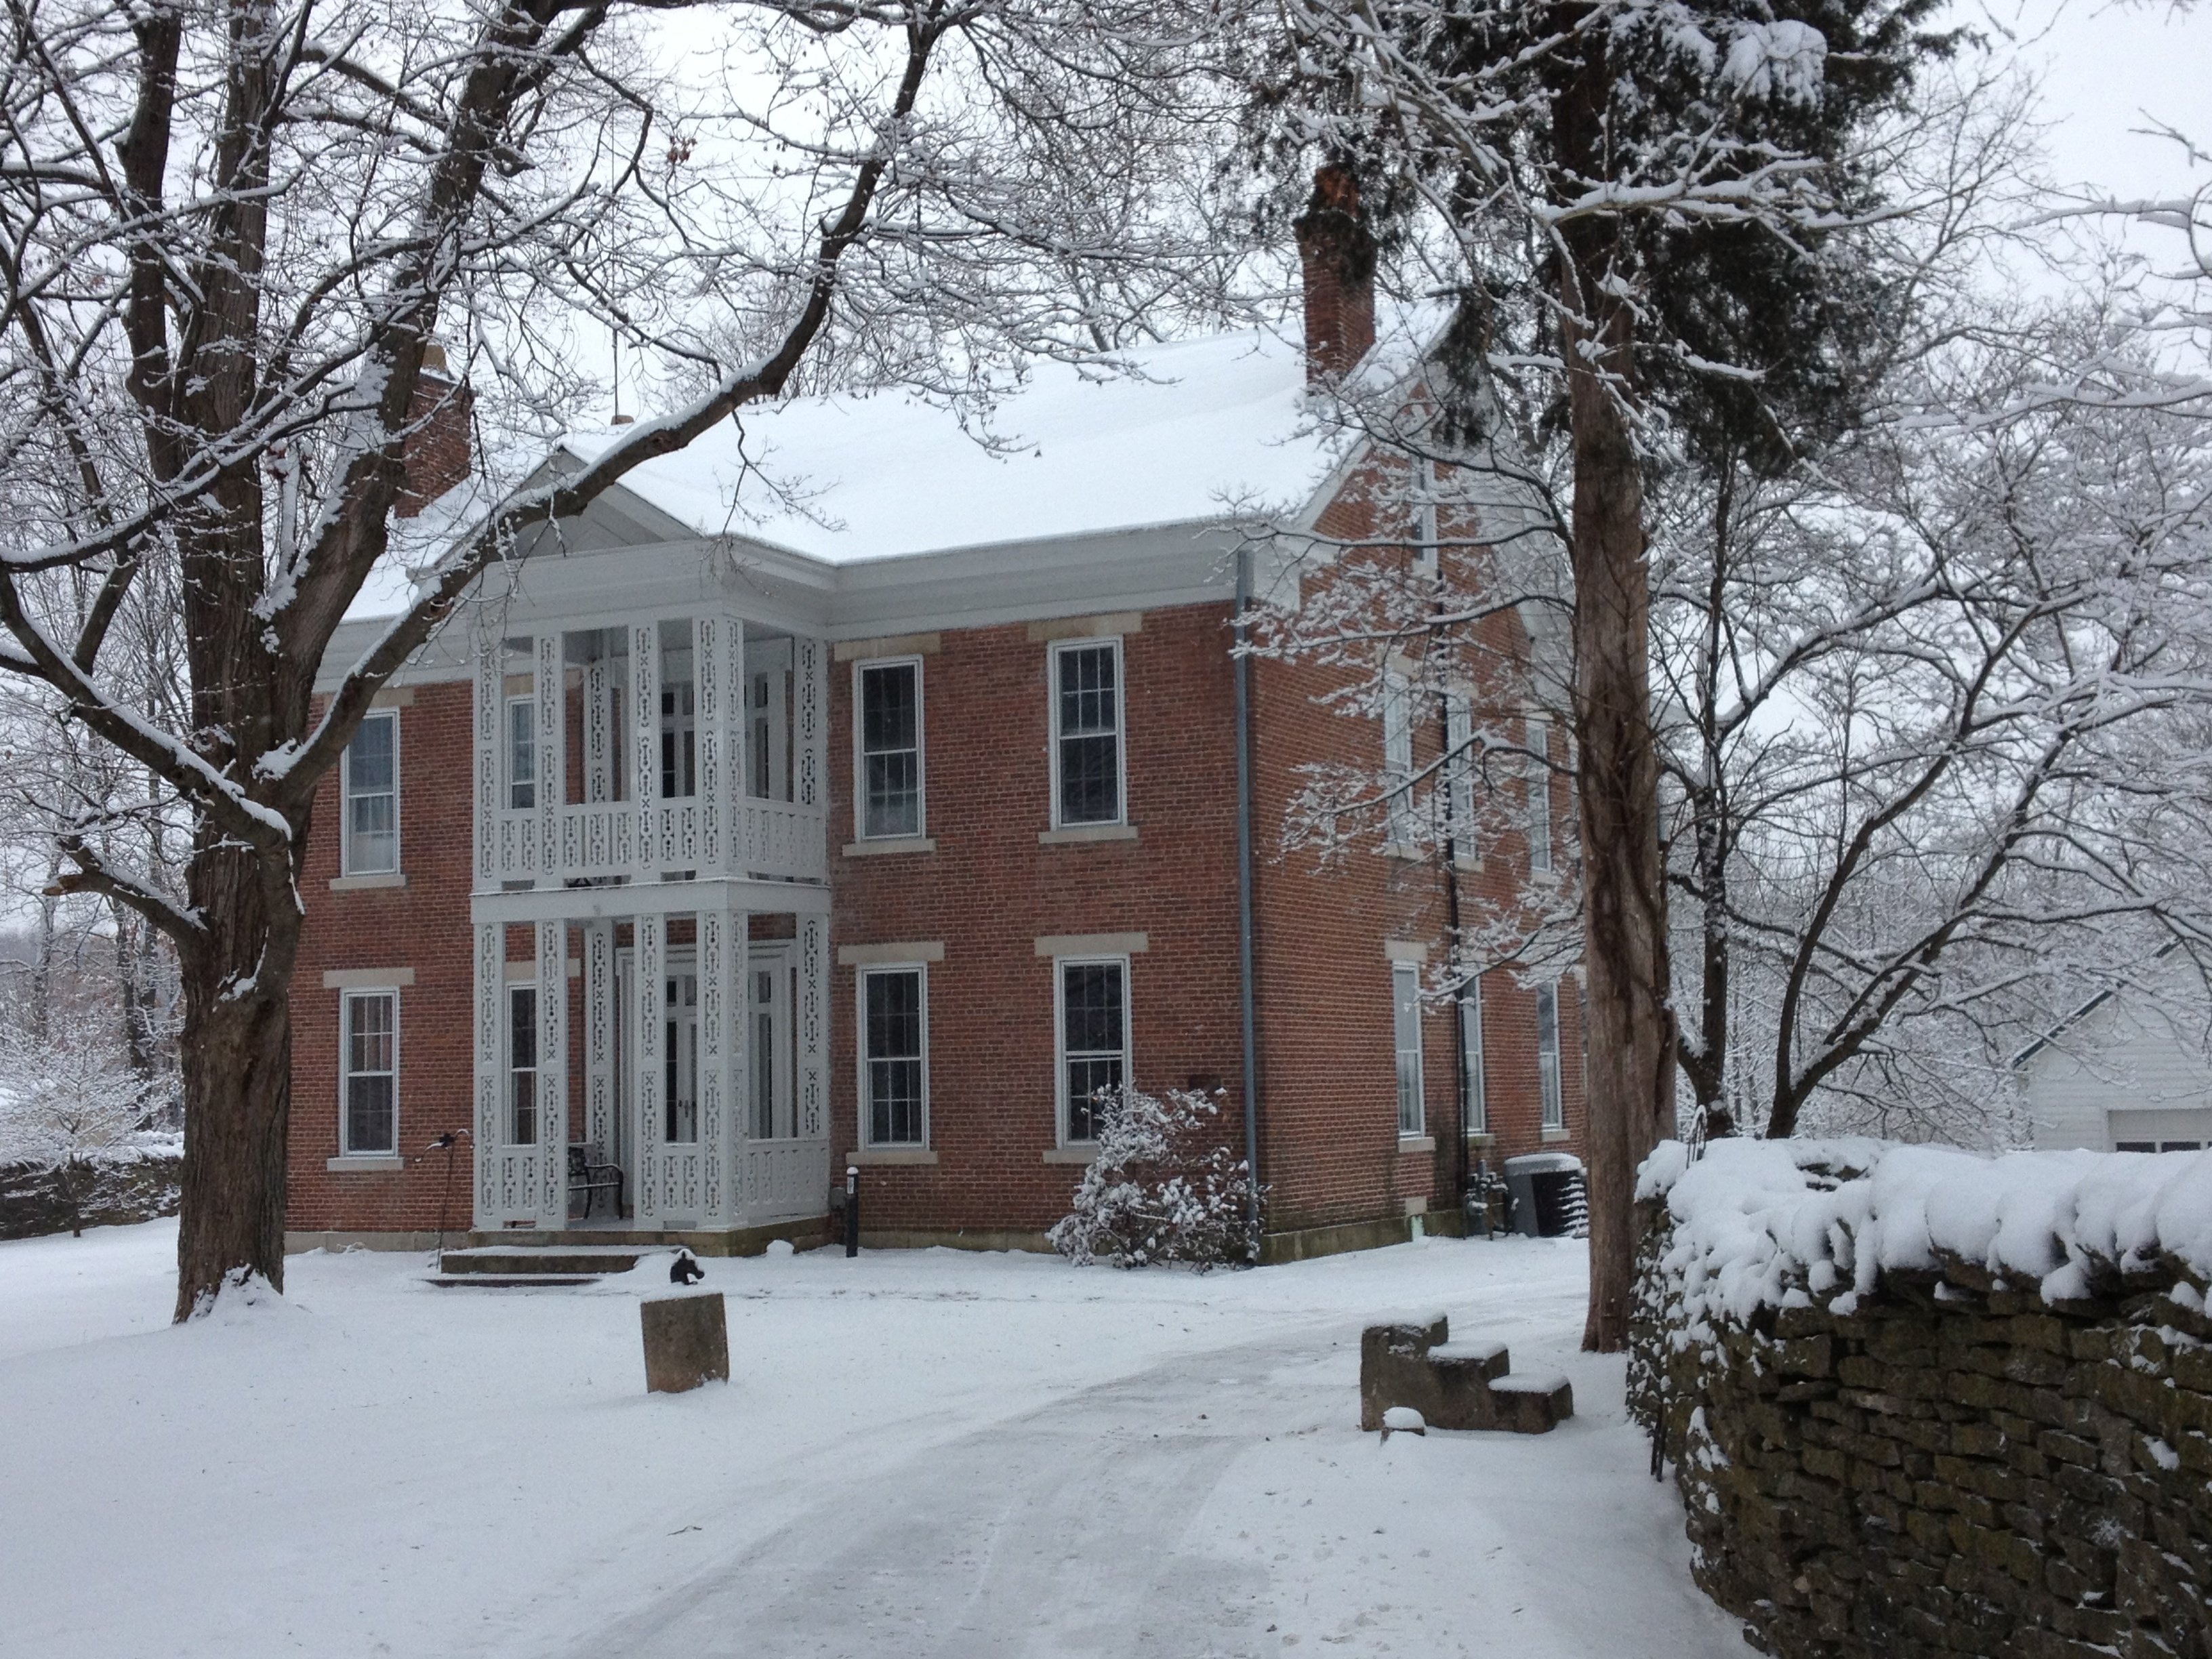 Photo of the house with snow